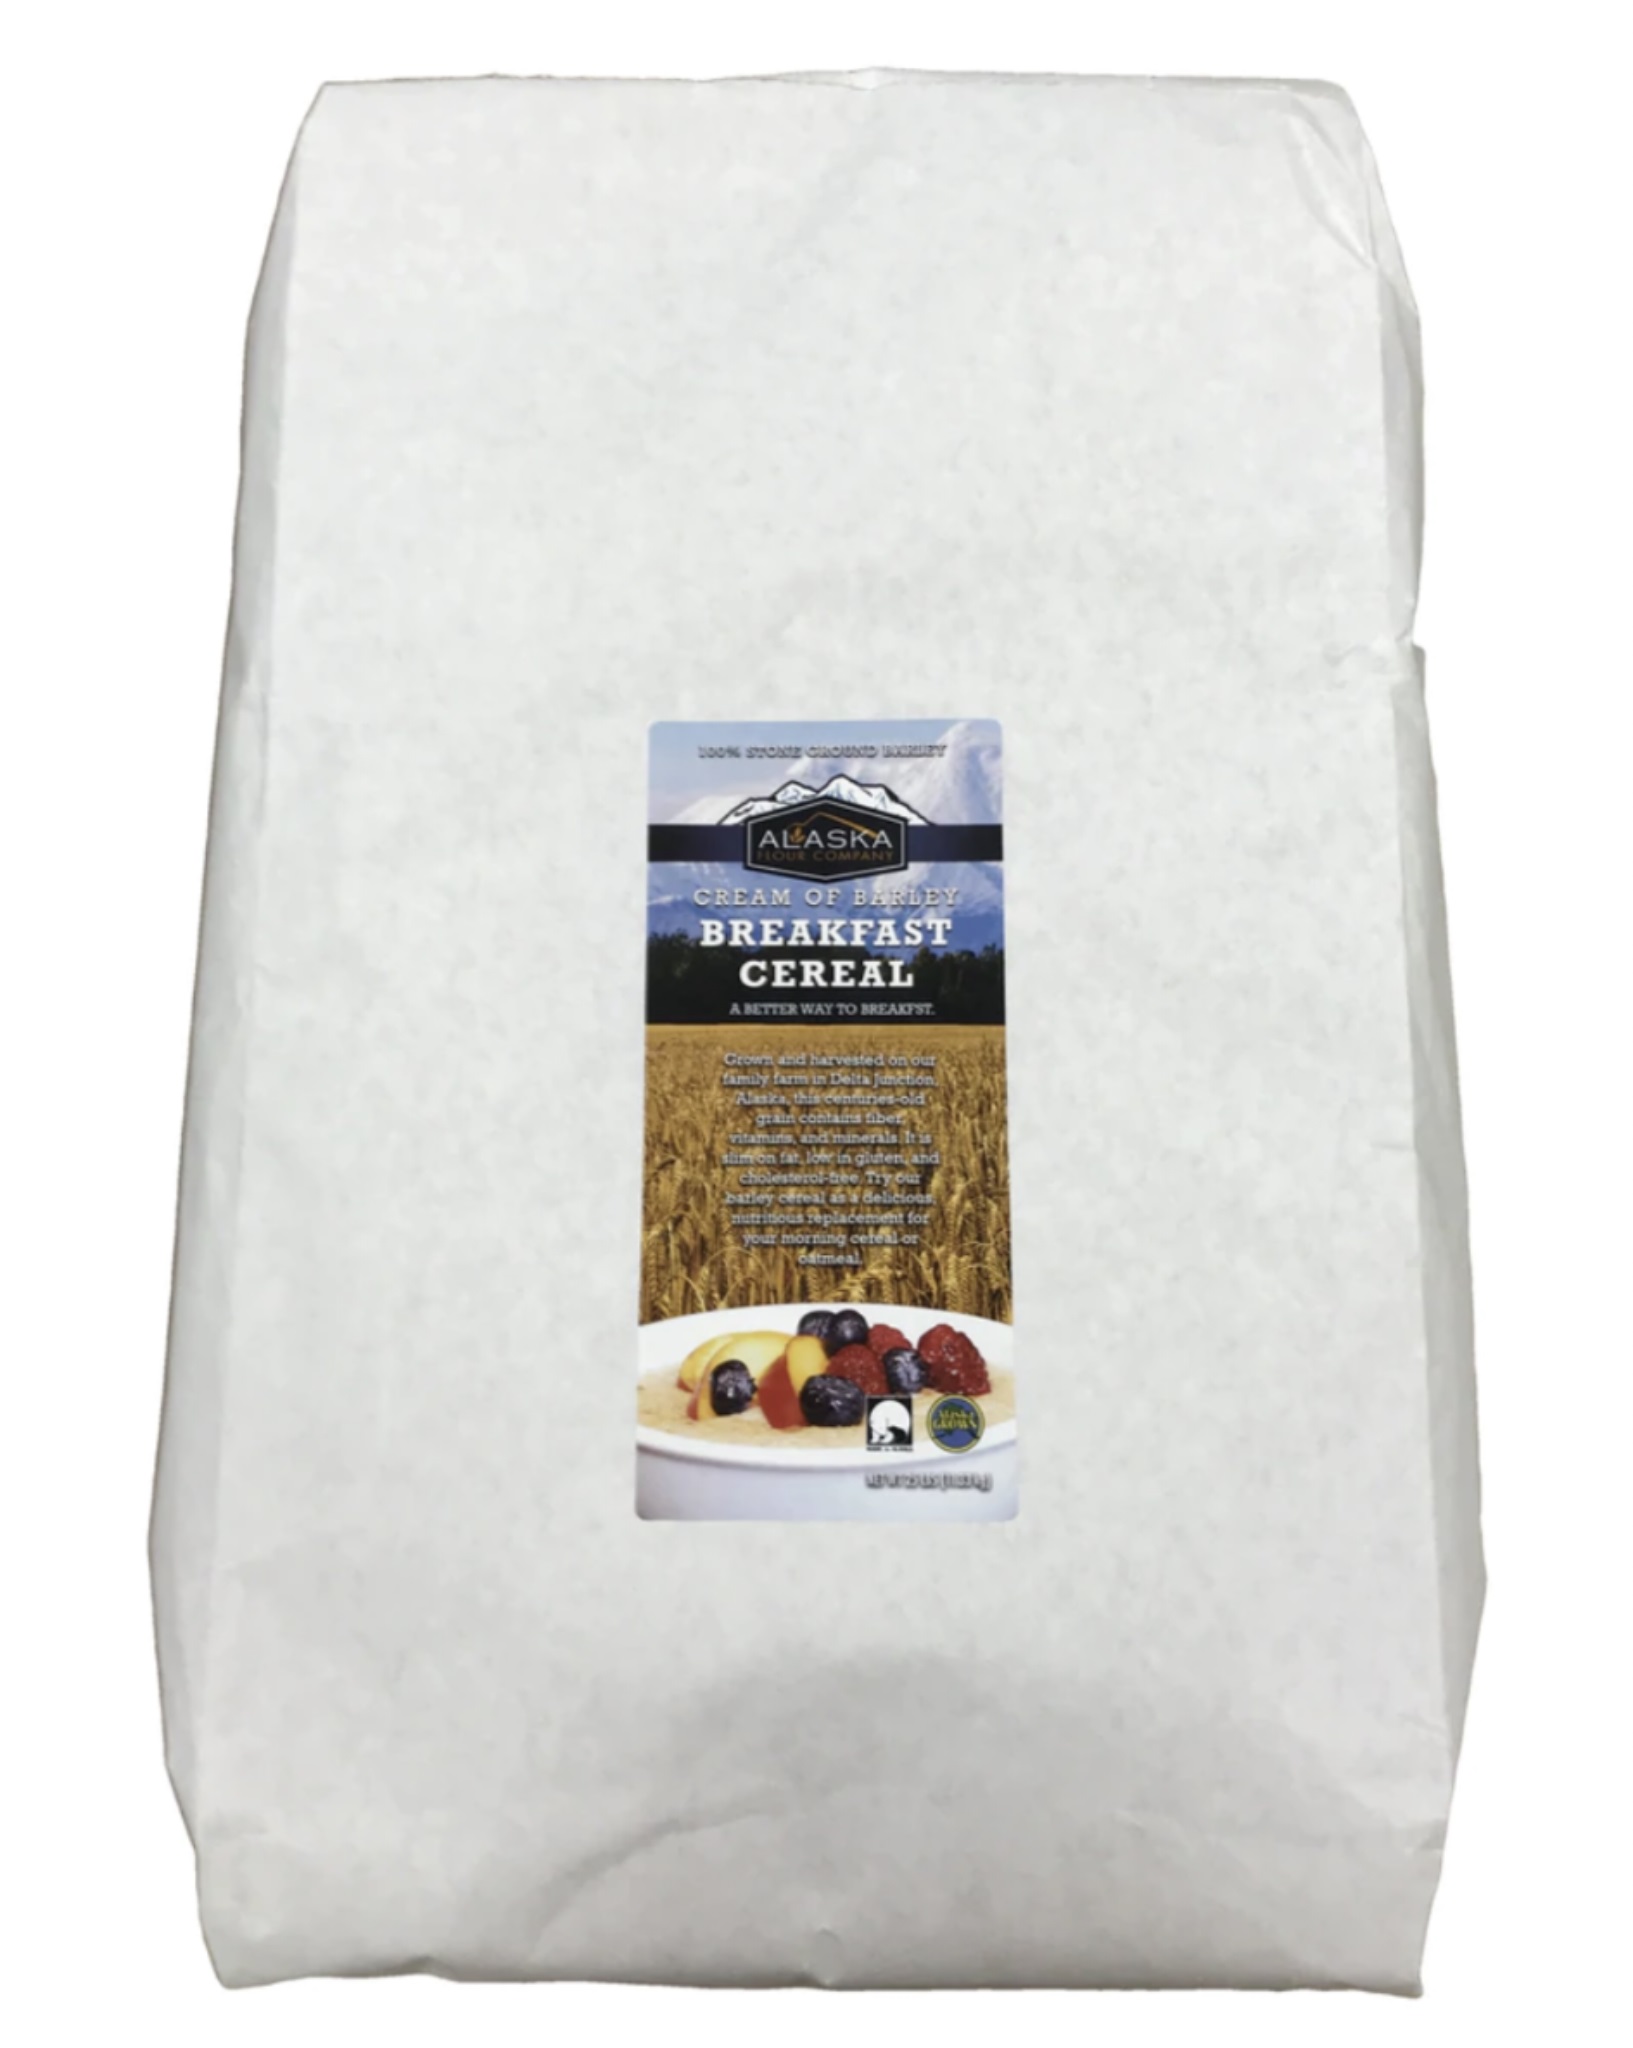 Barley Cream of, Breakfast Cereal 25lb AK Flour Company - Sold by PACK